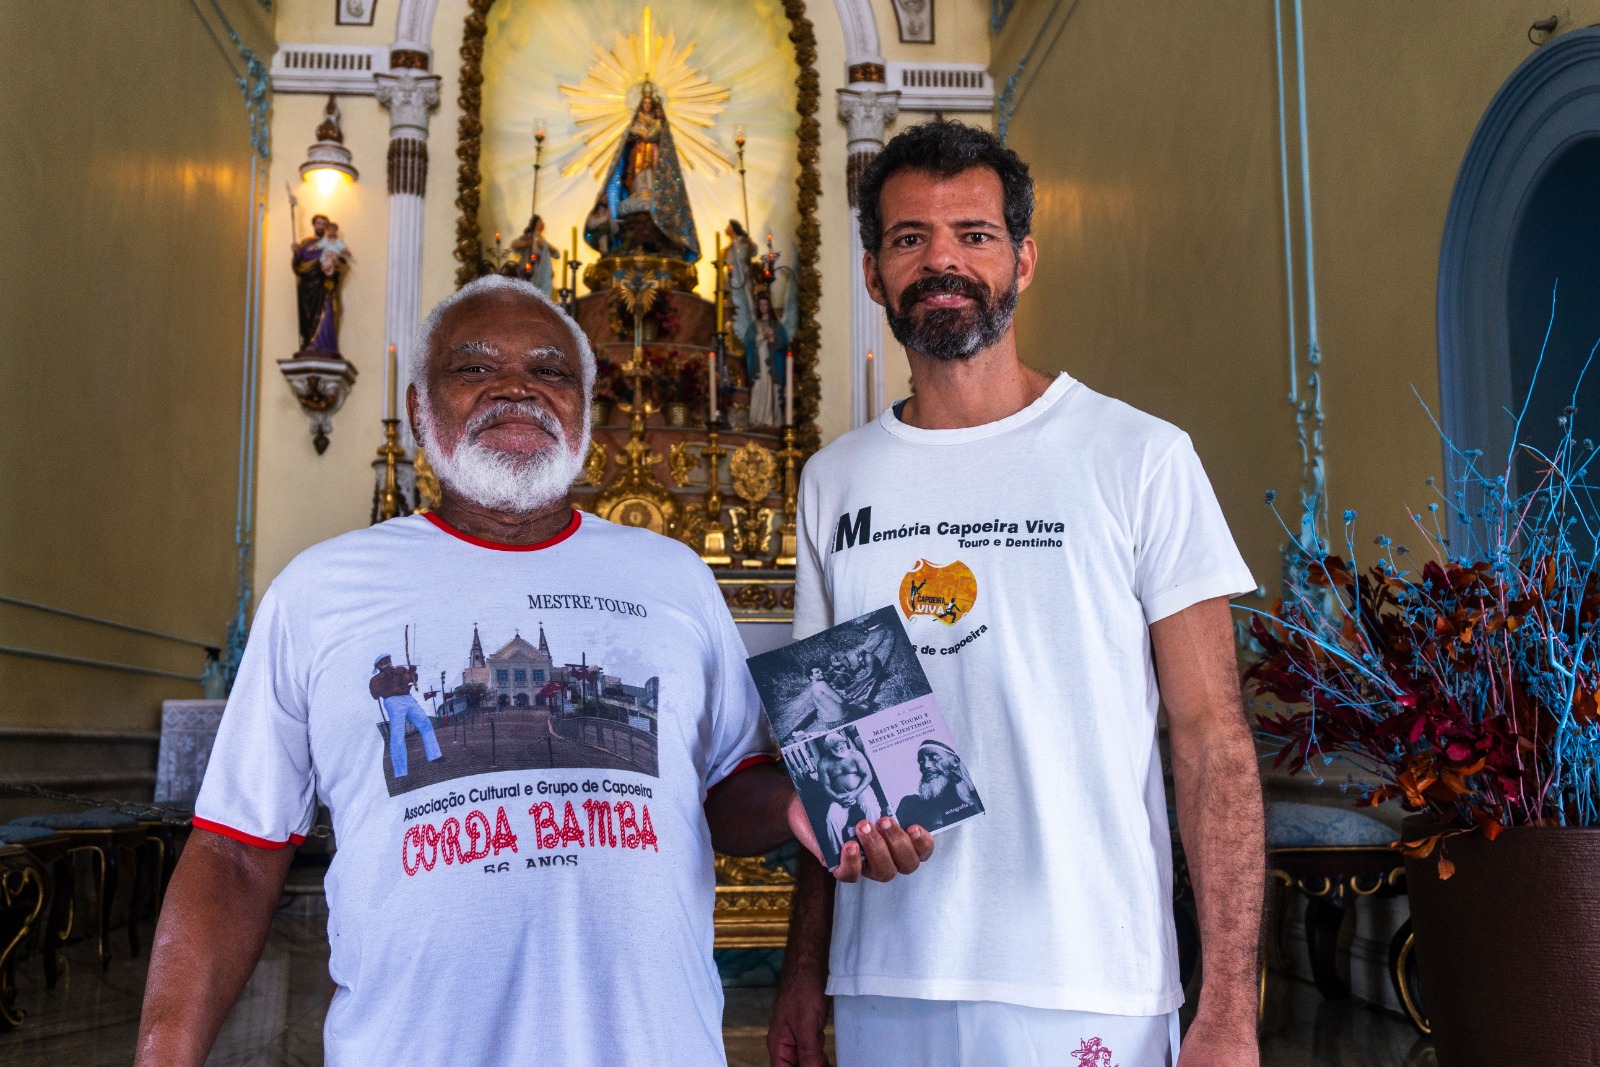 Rio City Council pays tribute to the “Pimvindo” brothers at the Pinha Festival